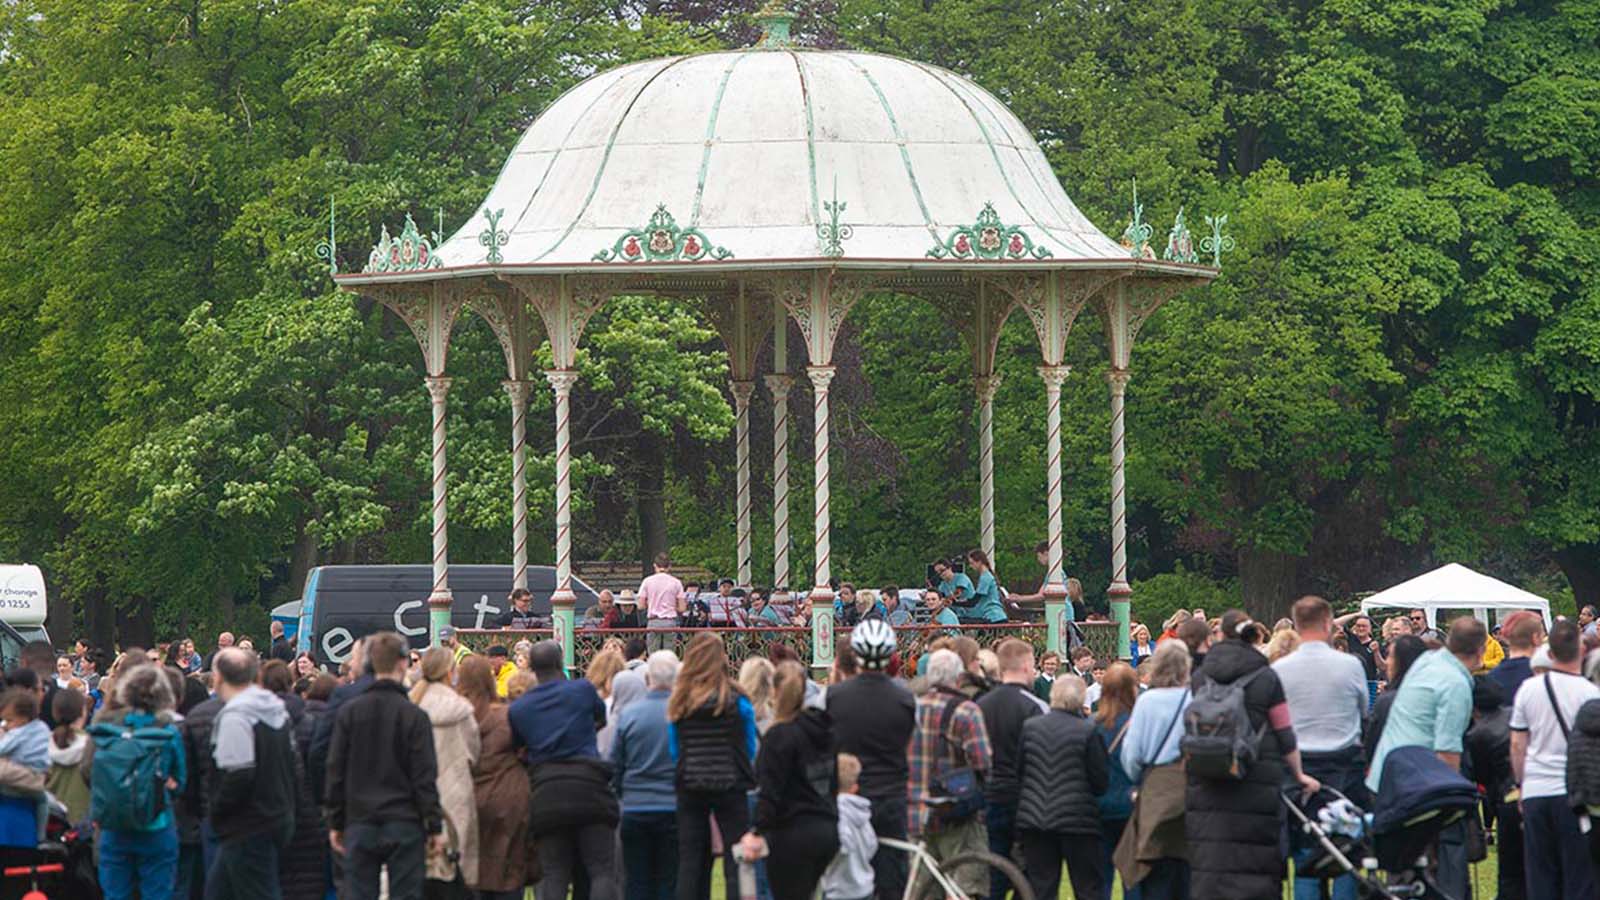 A large crowd in a green and leafy park stand watching a band perform on a gazebo